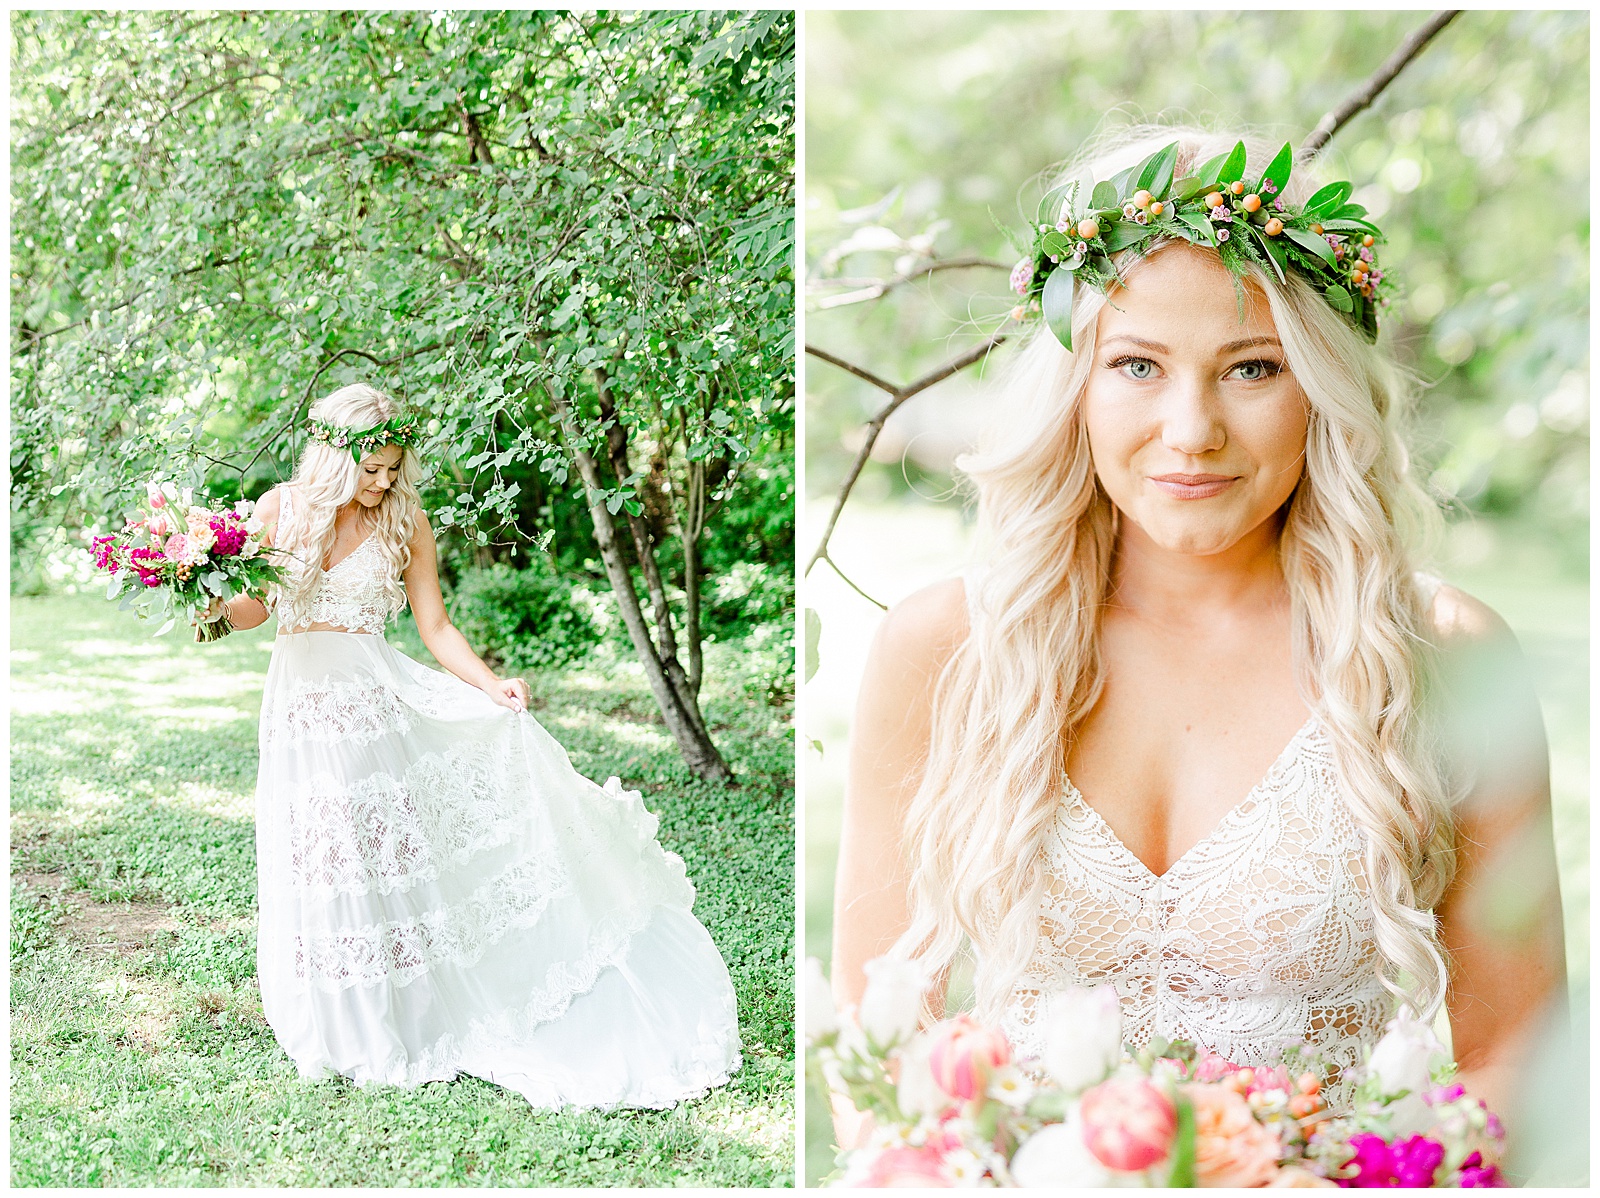 Enchanting Lace Bohemian Wedding Dress and Flower Crown - Bright Boho Chic Theme in Charlotte, North Carolina | check out the full wedding at KevynDixonPhoto.com